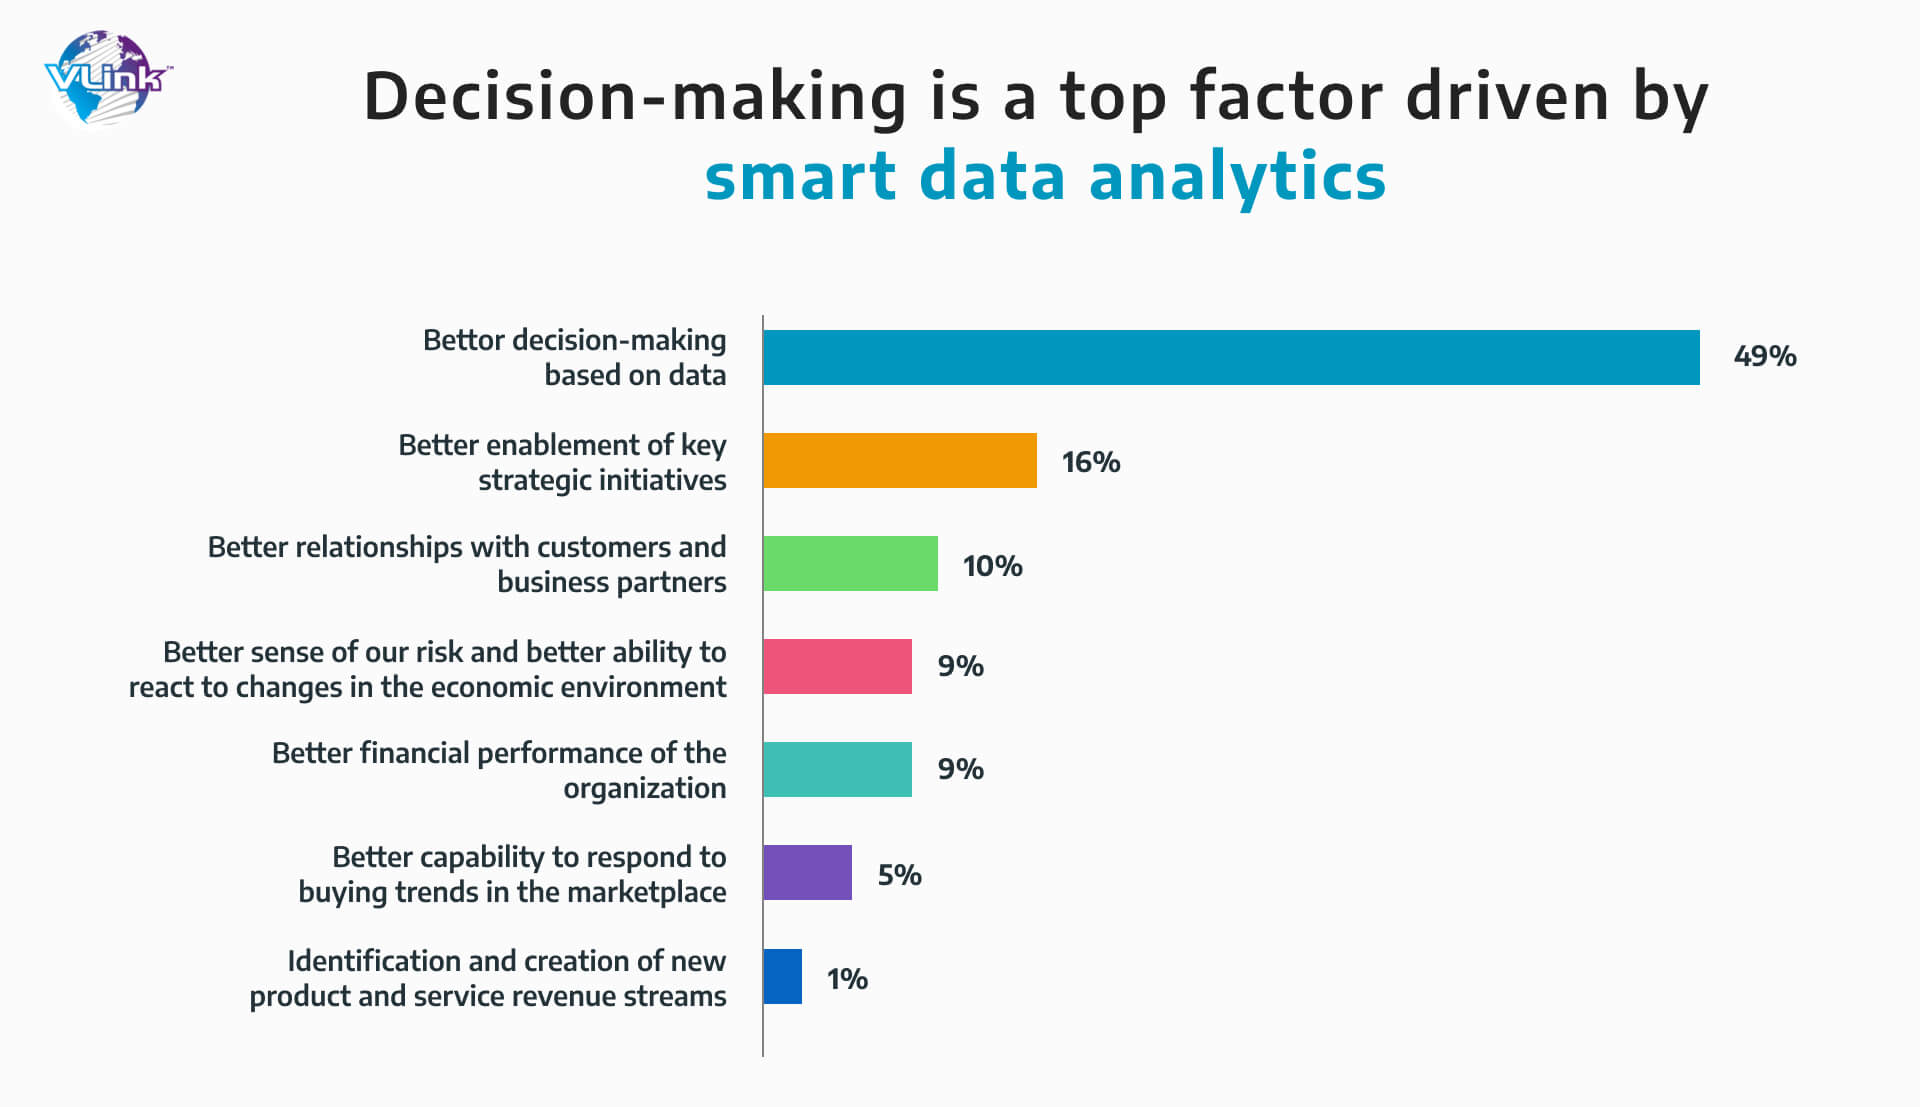 Decision-making is a top factor driven by smart data analytics